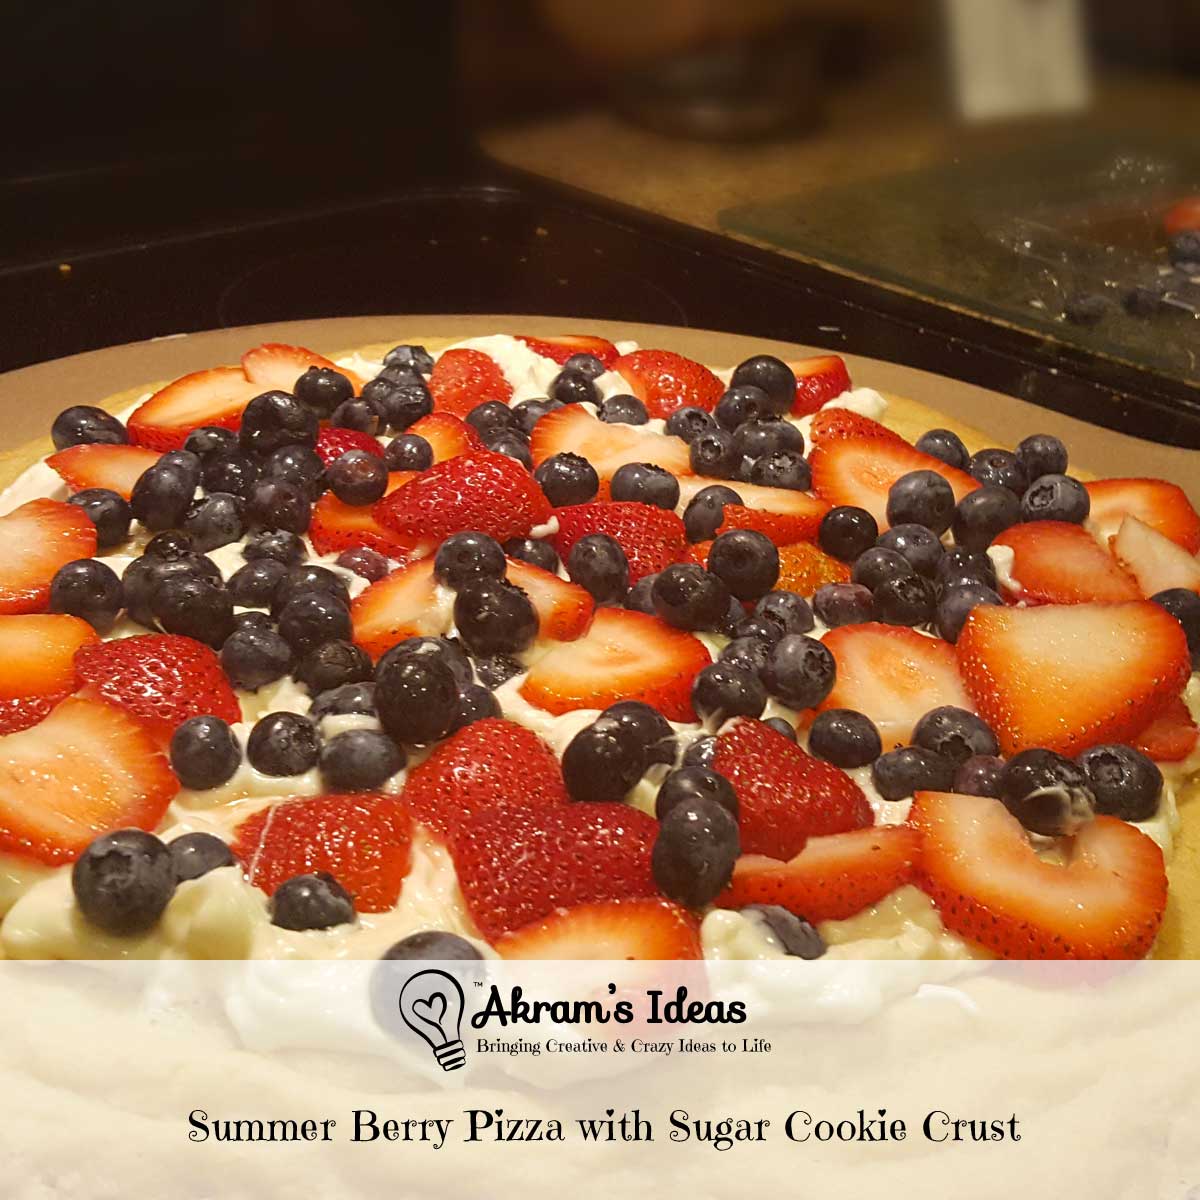 Recipe for an end of summer berry pizza with sugar cookie crust and white chocolate sauce.